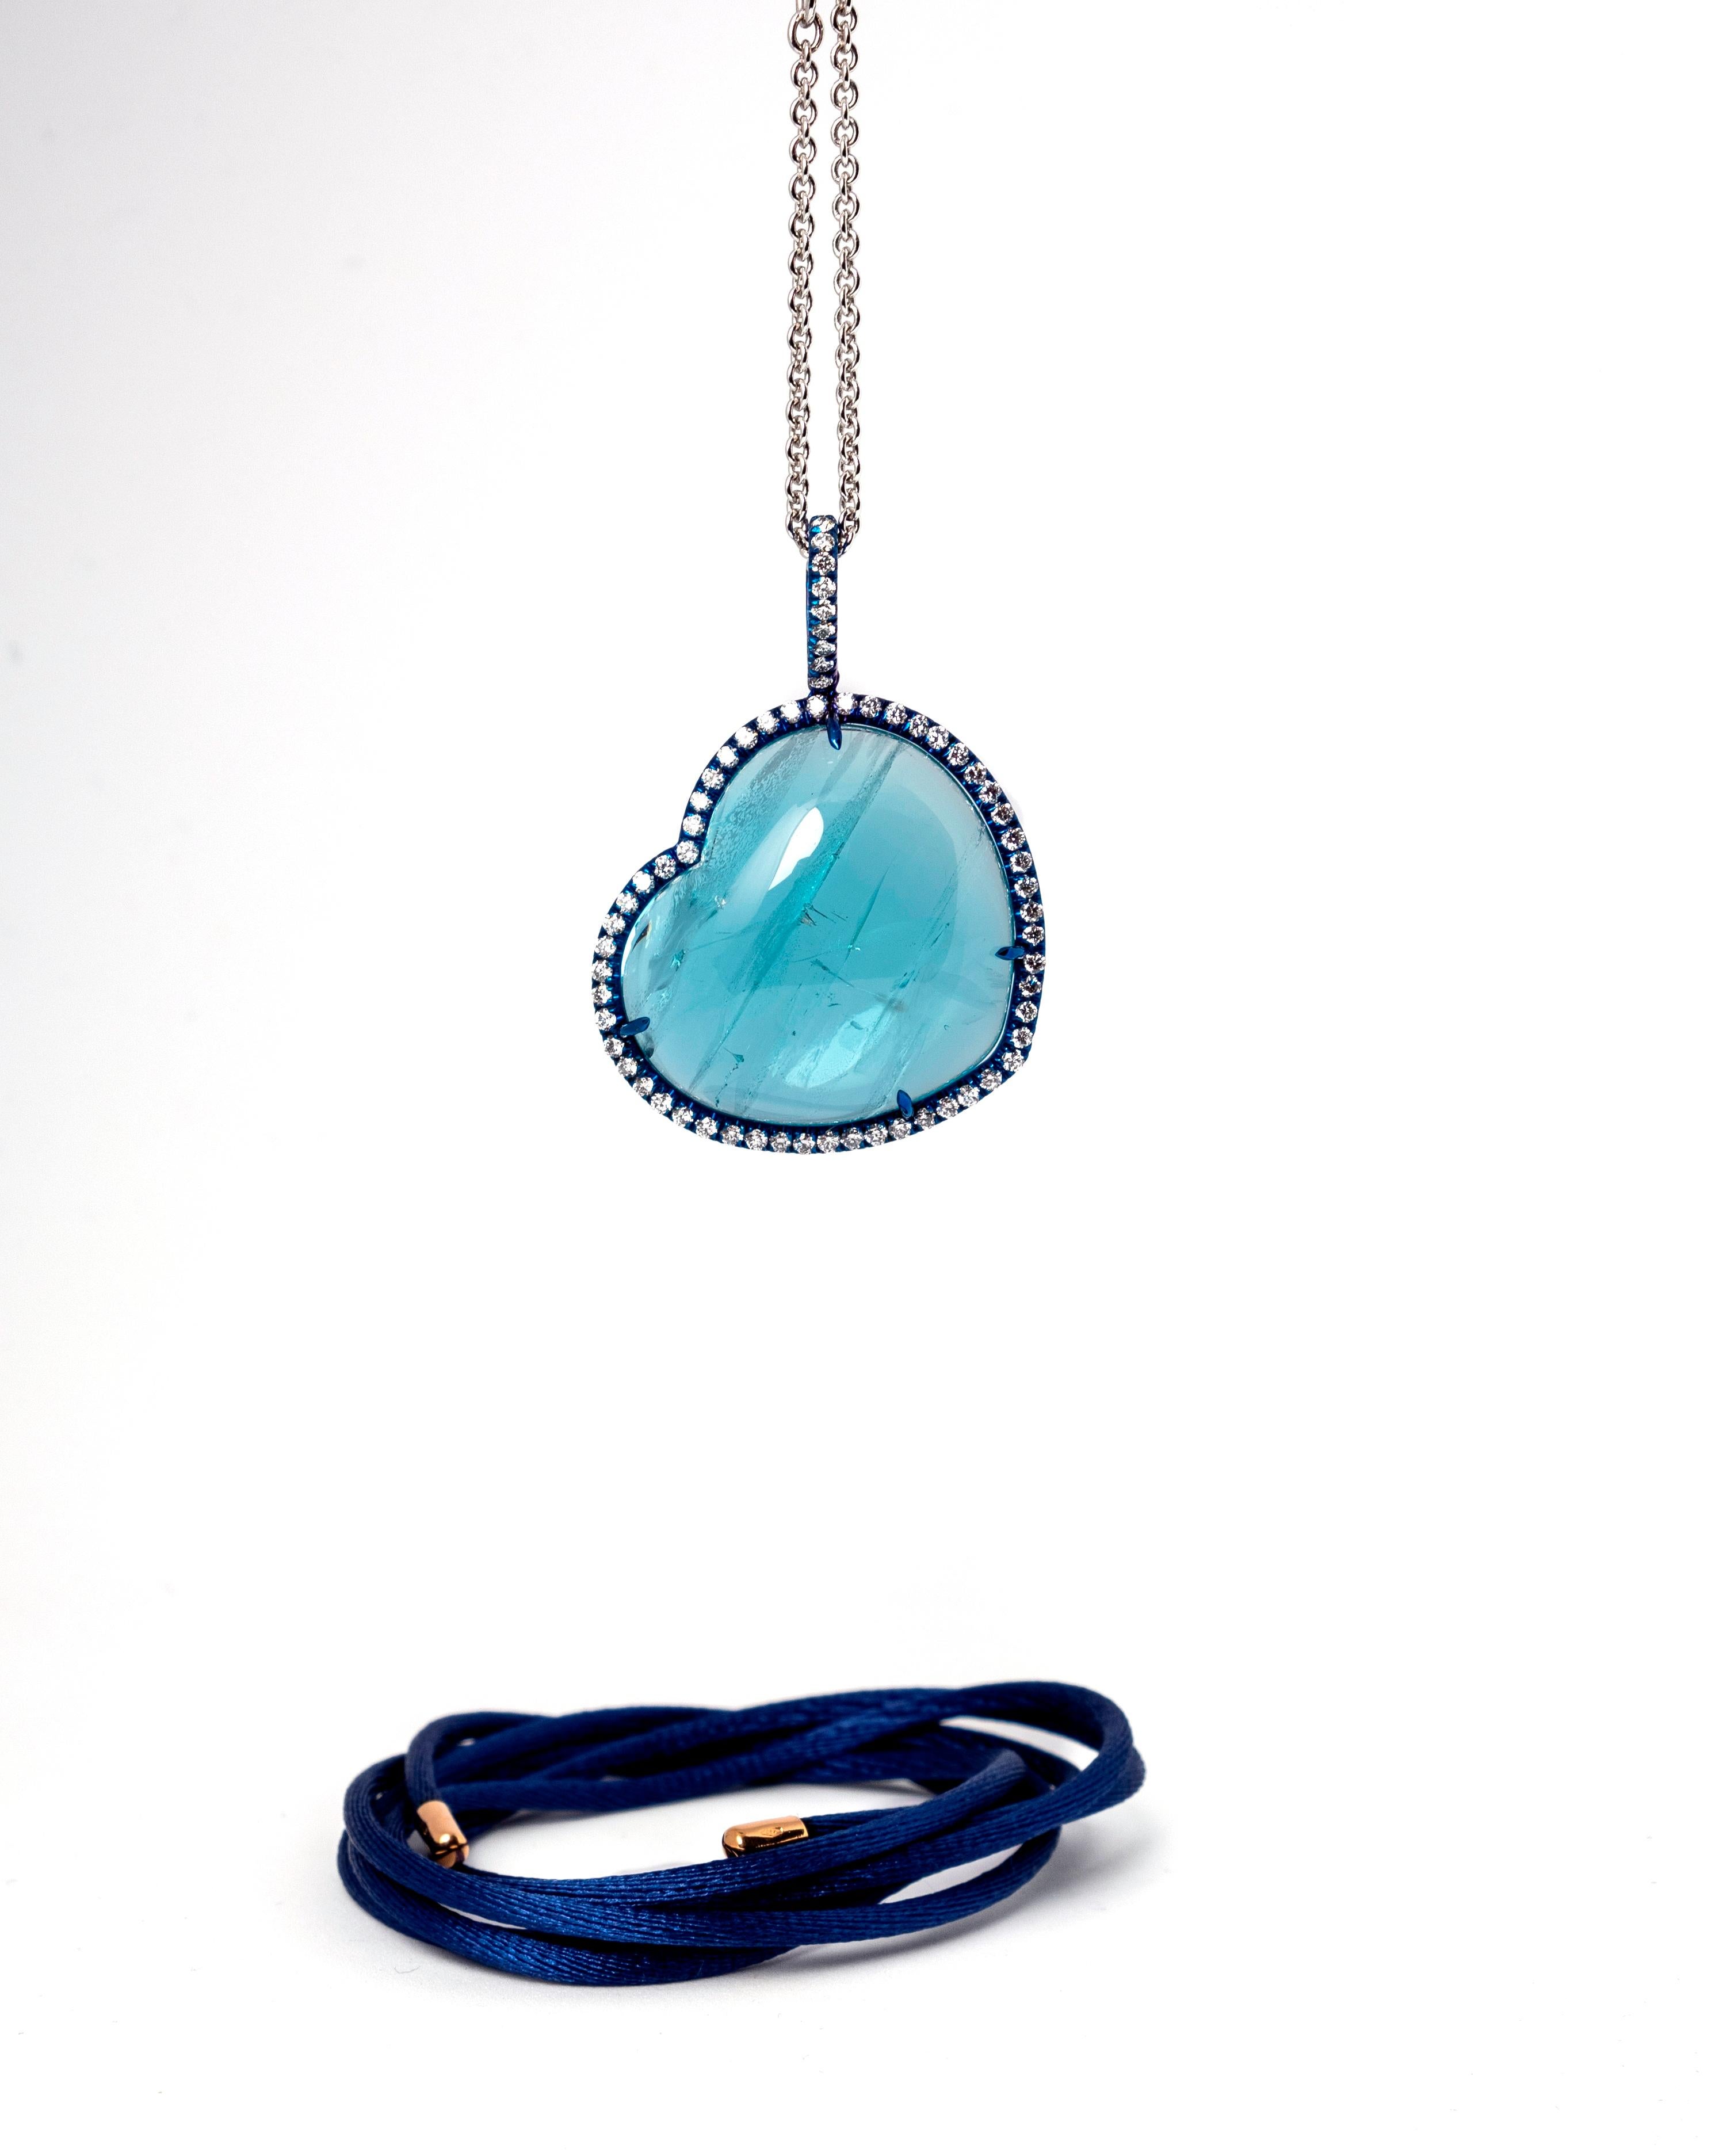 Handcrafted in Margherita Burgener family workshop, the lovely pendant with chain features as main stone a Brazilian cabochon cut 44.57 carat aquamarine.
The stone is unique, especially due to the lovely natural inclusions.
A line of blue titanium